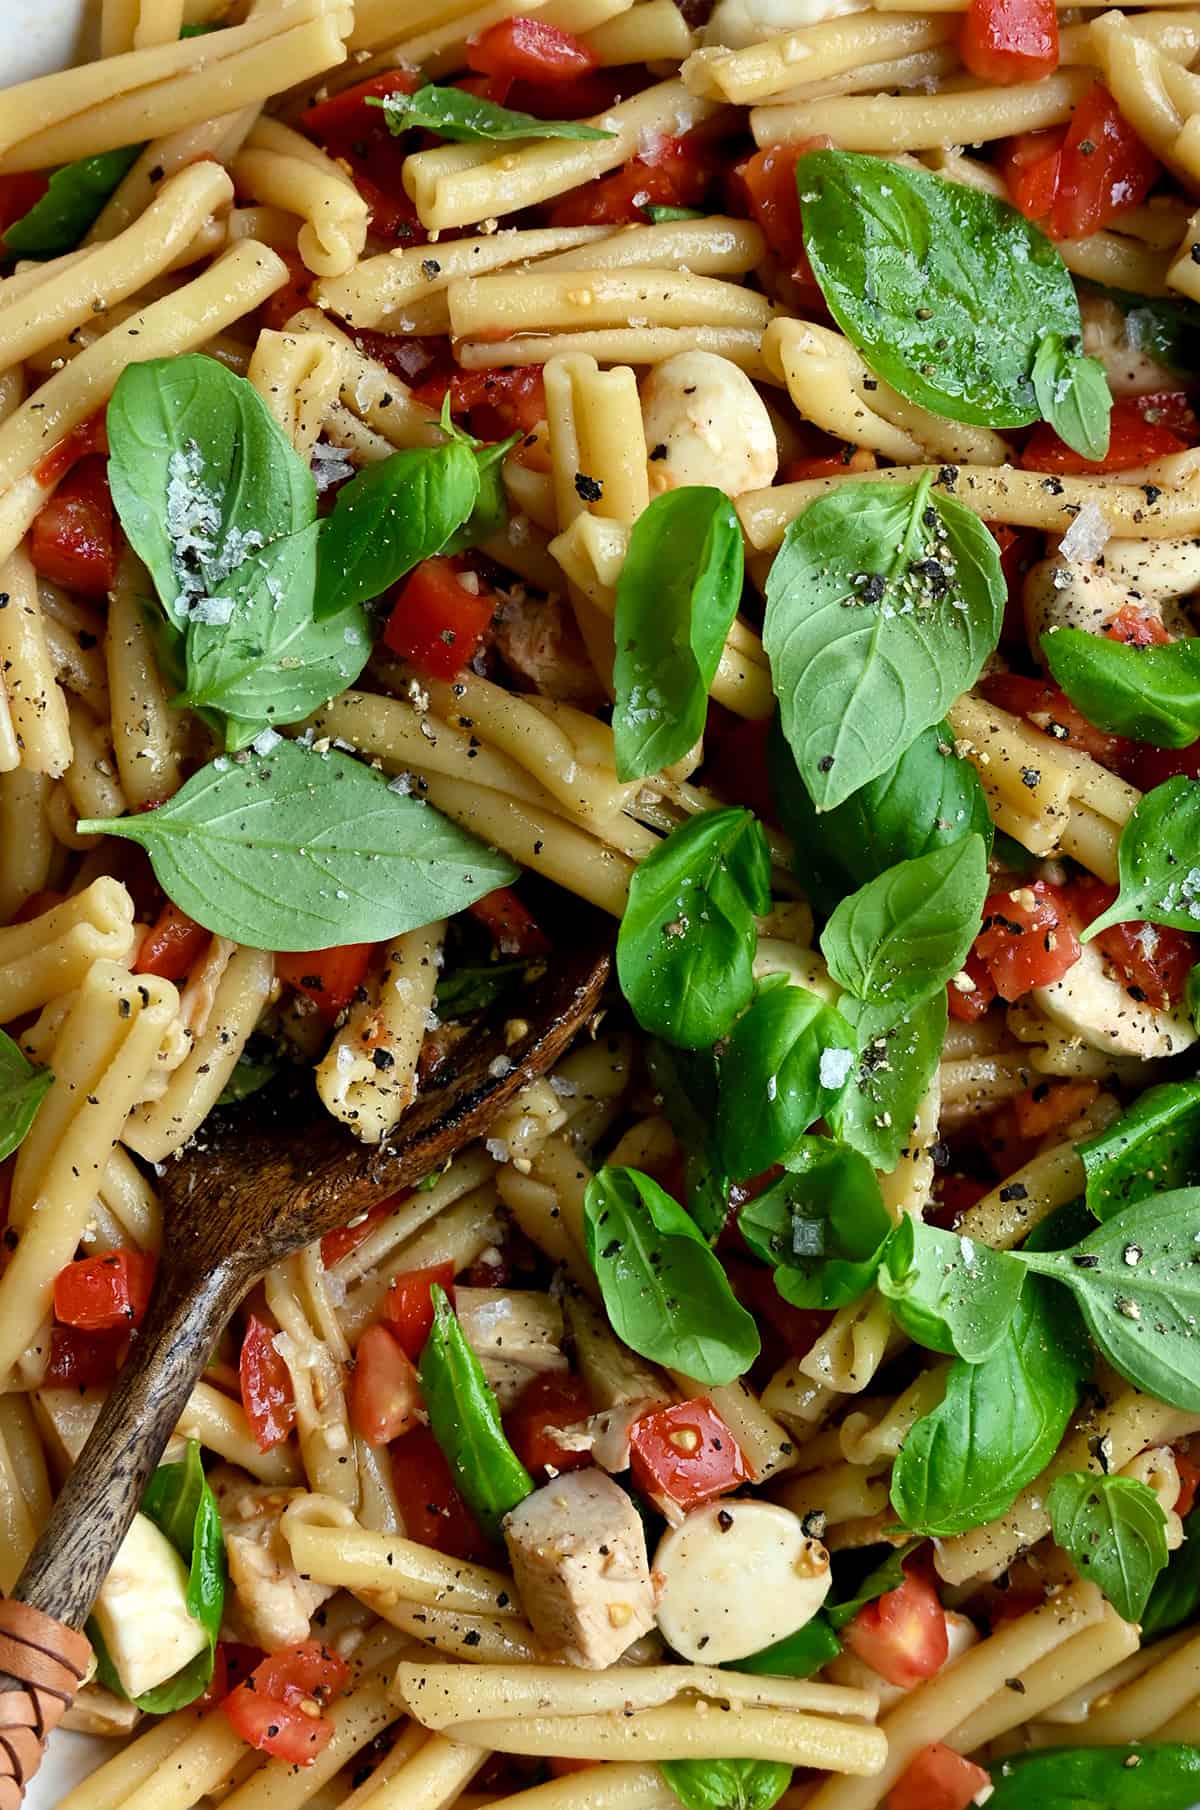 A close-up view of pasta salad with fresh basil, diced tomatoes, mini mozzarella balls and cubed chicken tossed in a garlicky balsamic dressing.